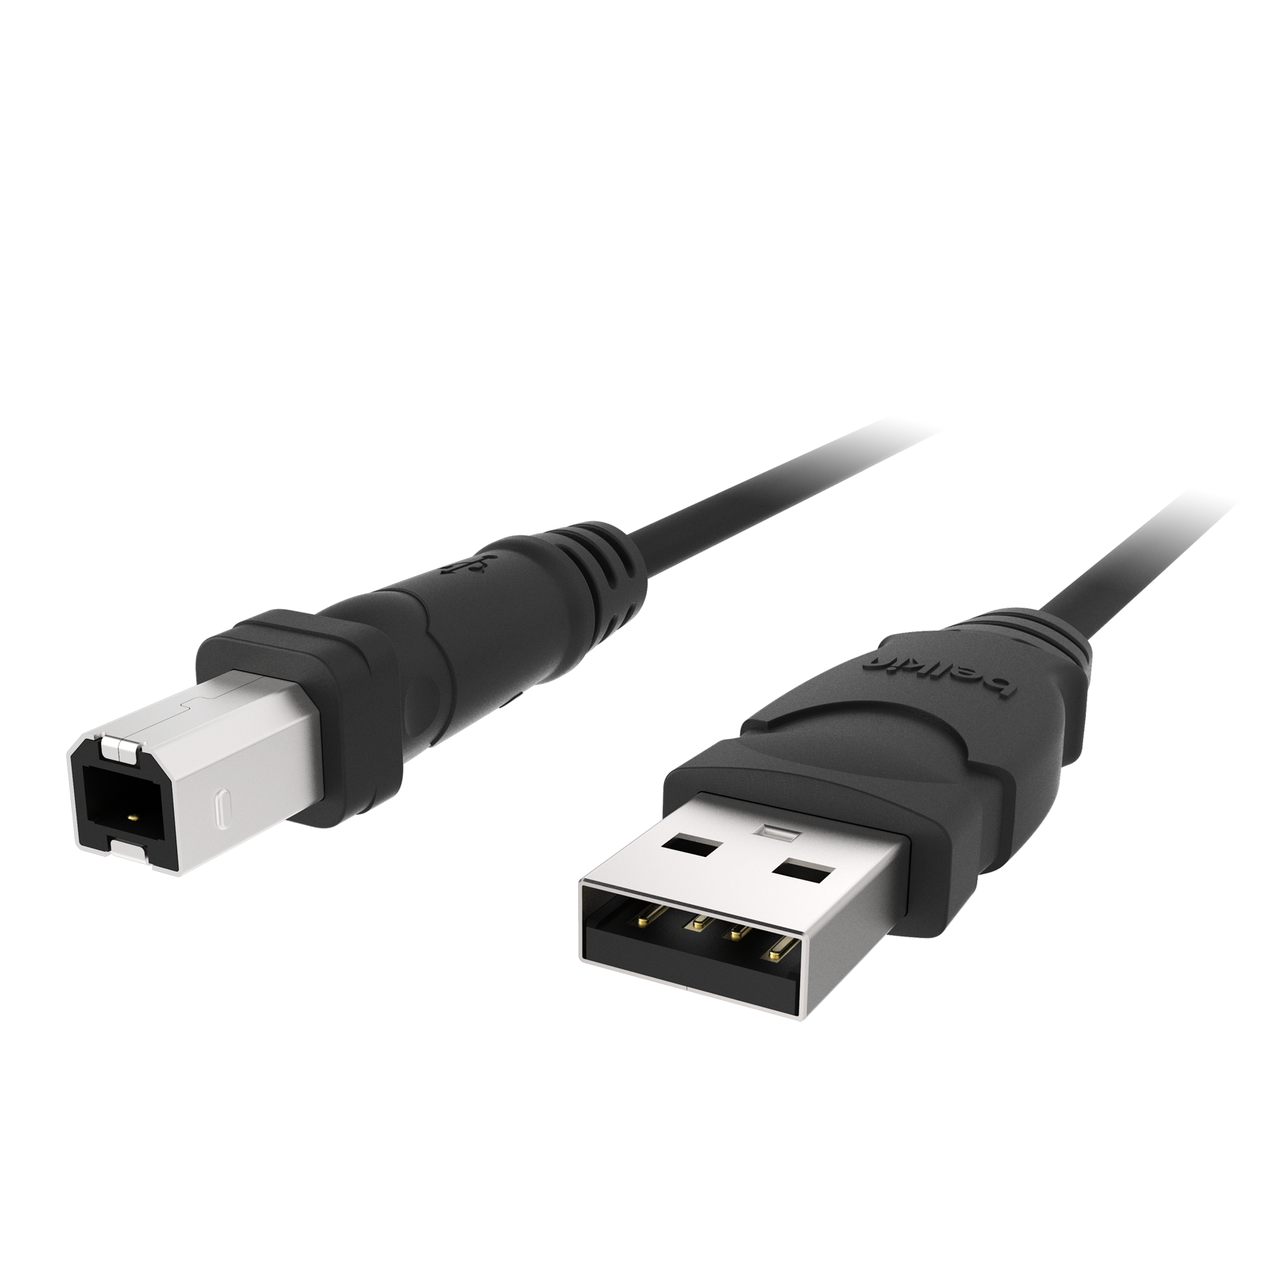 langsom Minefelt rulletrappe 2.0 USB-A to USB-B Cable - 3ft | Belkin